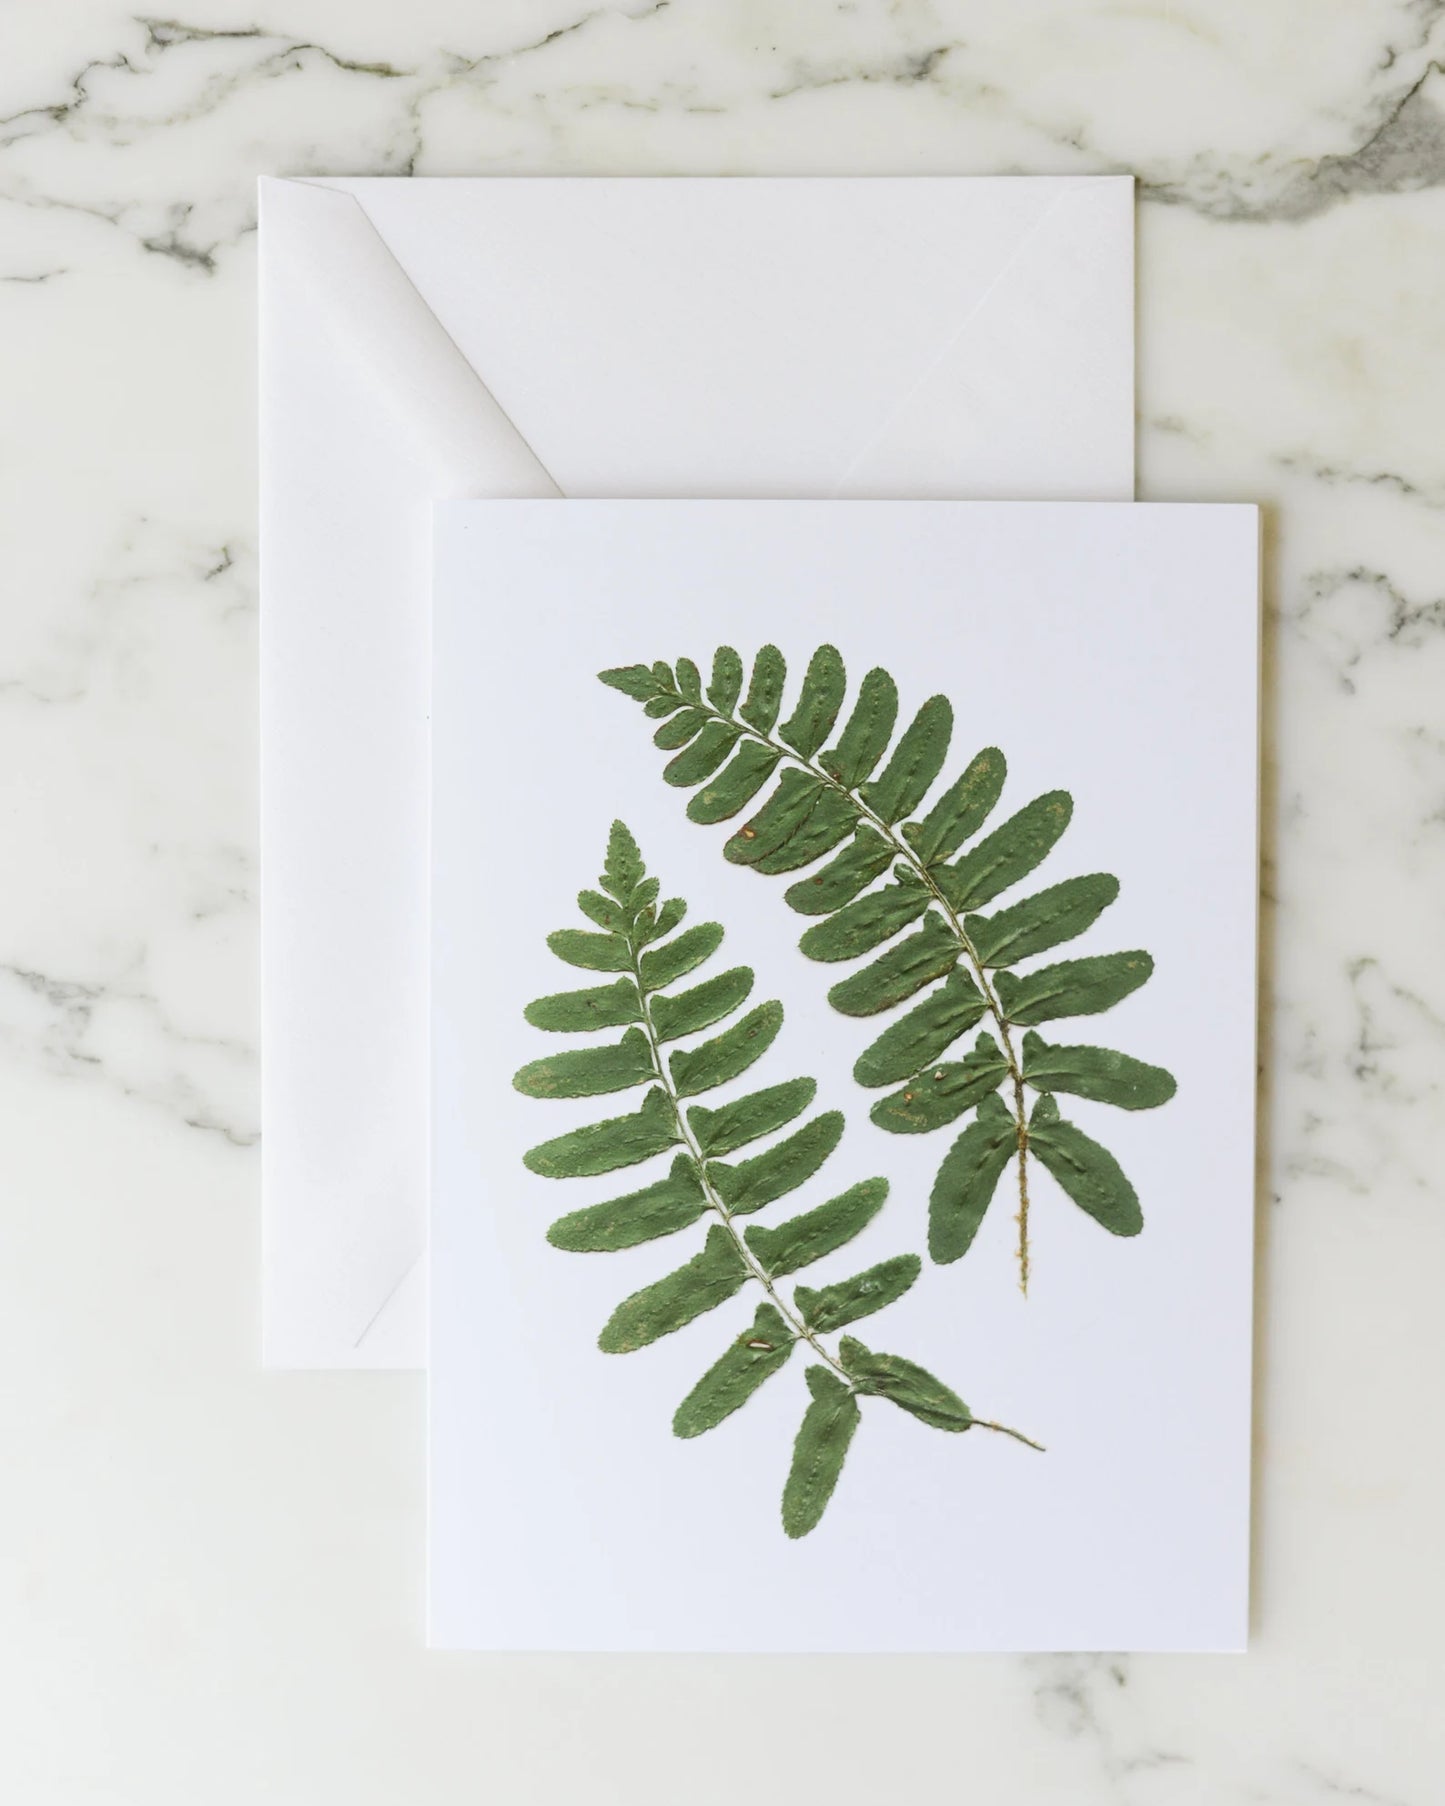 Forest Ferns - Blank Greeting Cards, set of 6 with envelopes